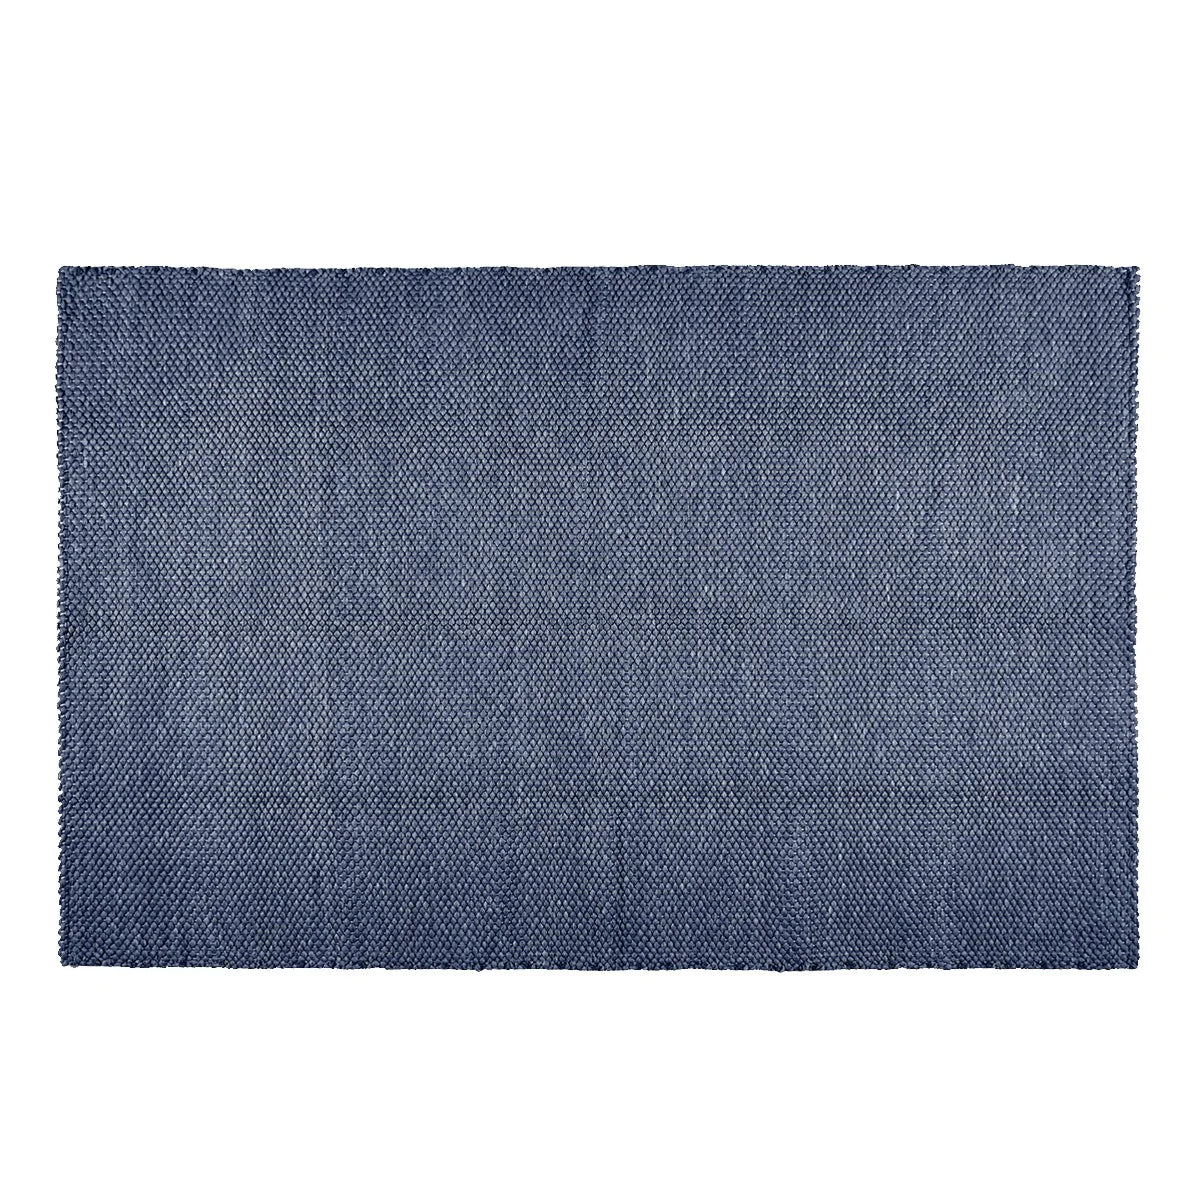 Deocriste Sustainable Rug Handwoven From Upcycled Fibers in Blue